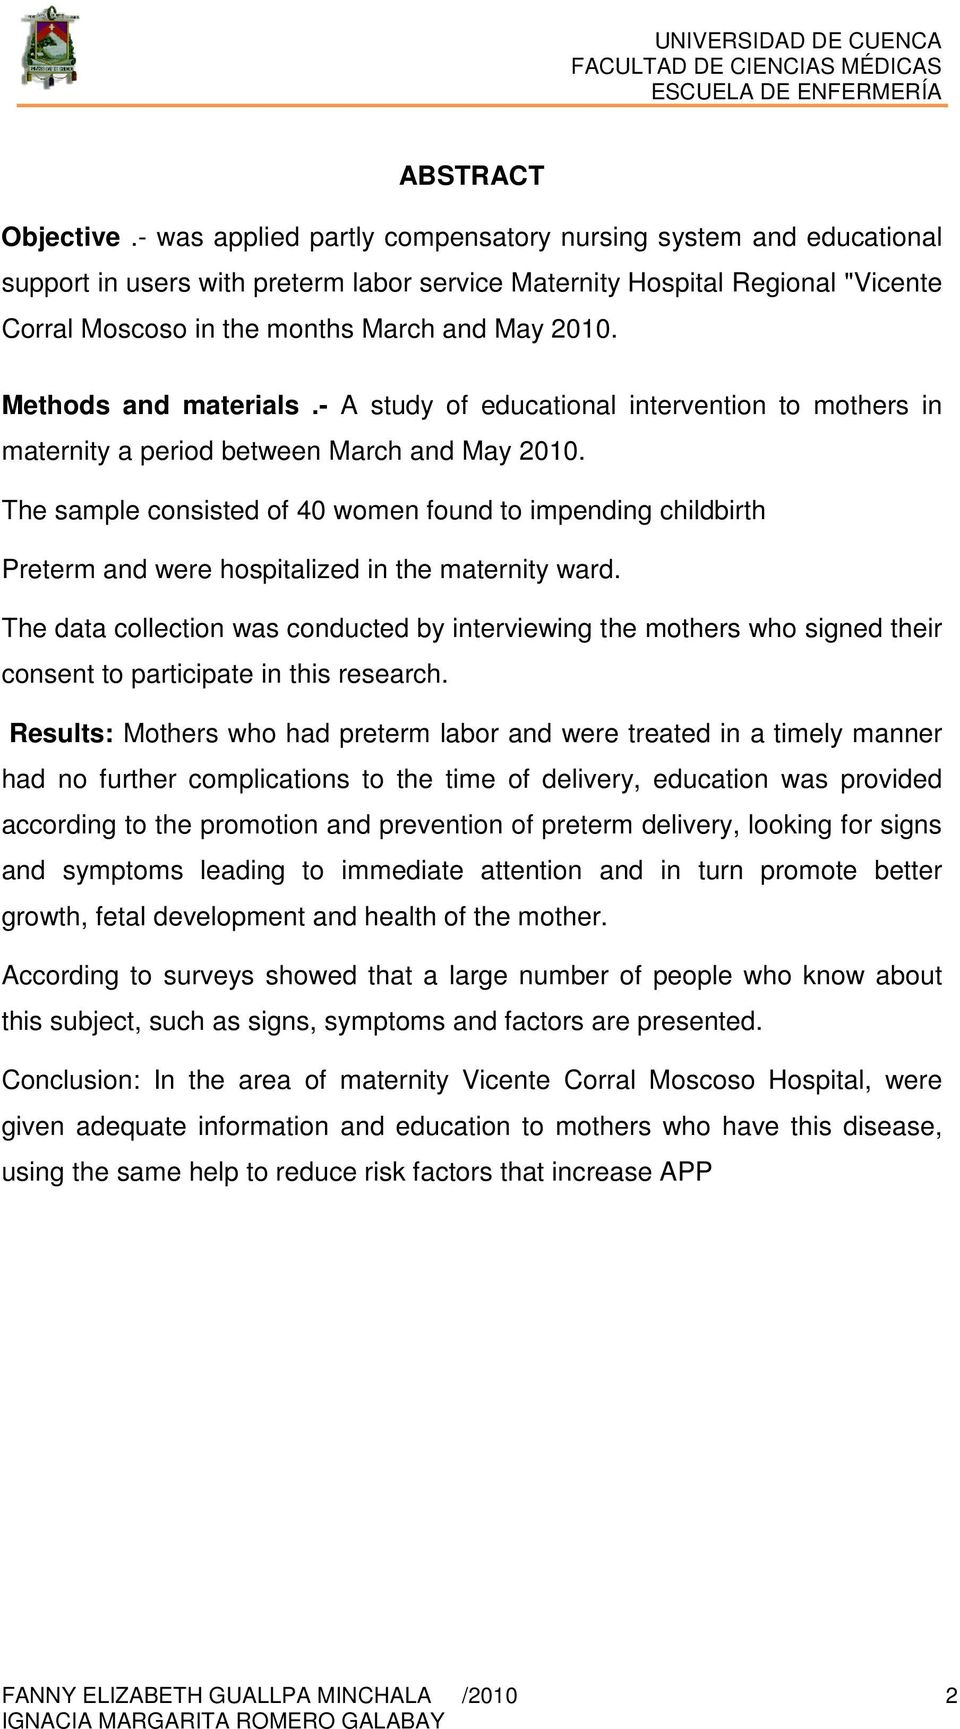 Methods and materials.- A study of educational intervention to mothers in maternity a period between March and May 2010.